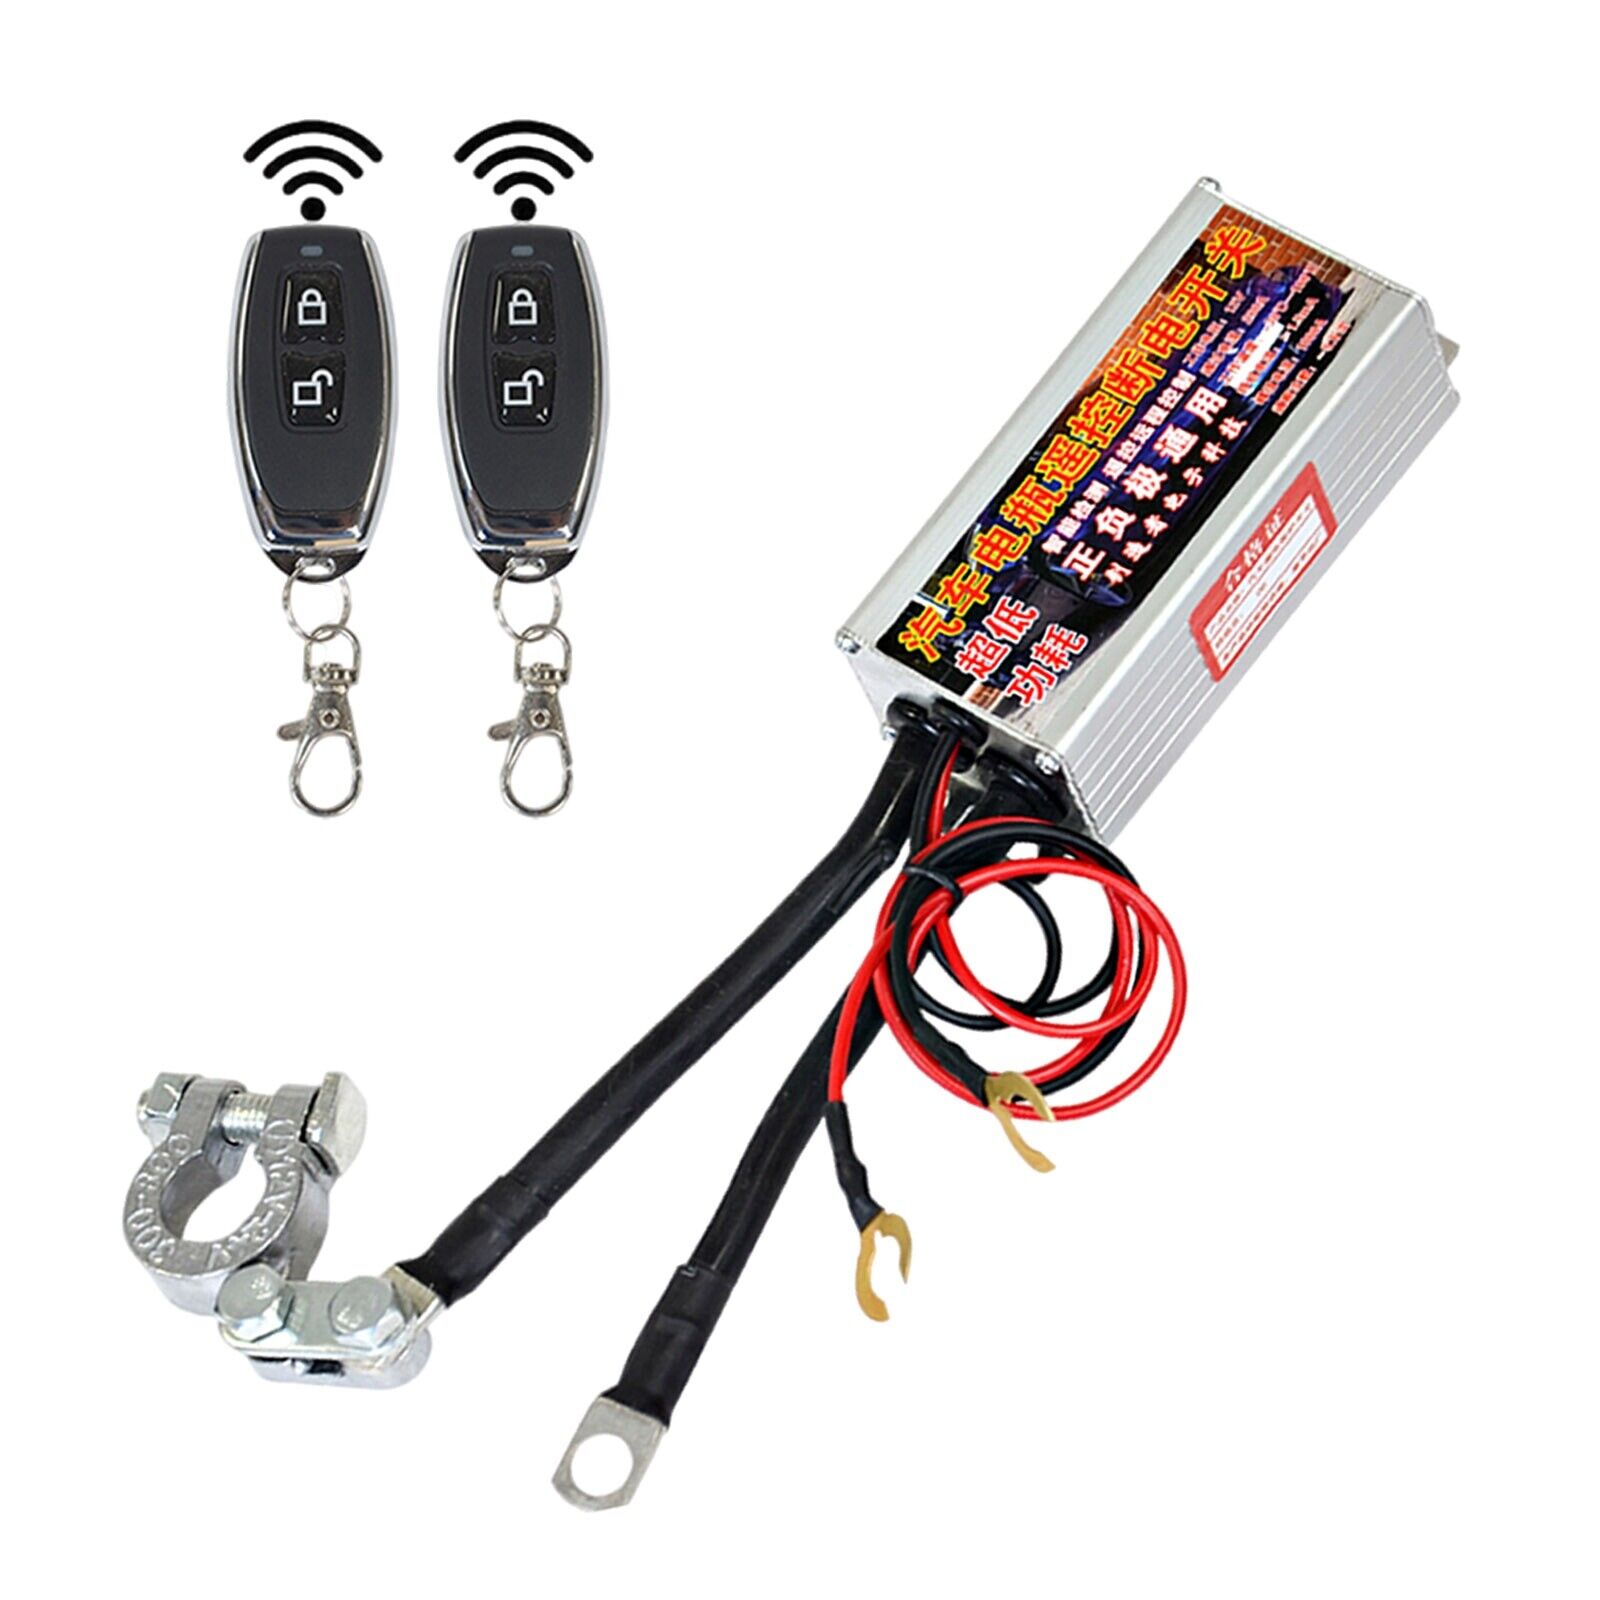 200A 12V Cars Battery Switch Disconnect Cut Off Master Kill w/2 Remote Controls